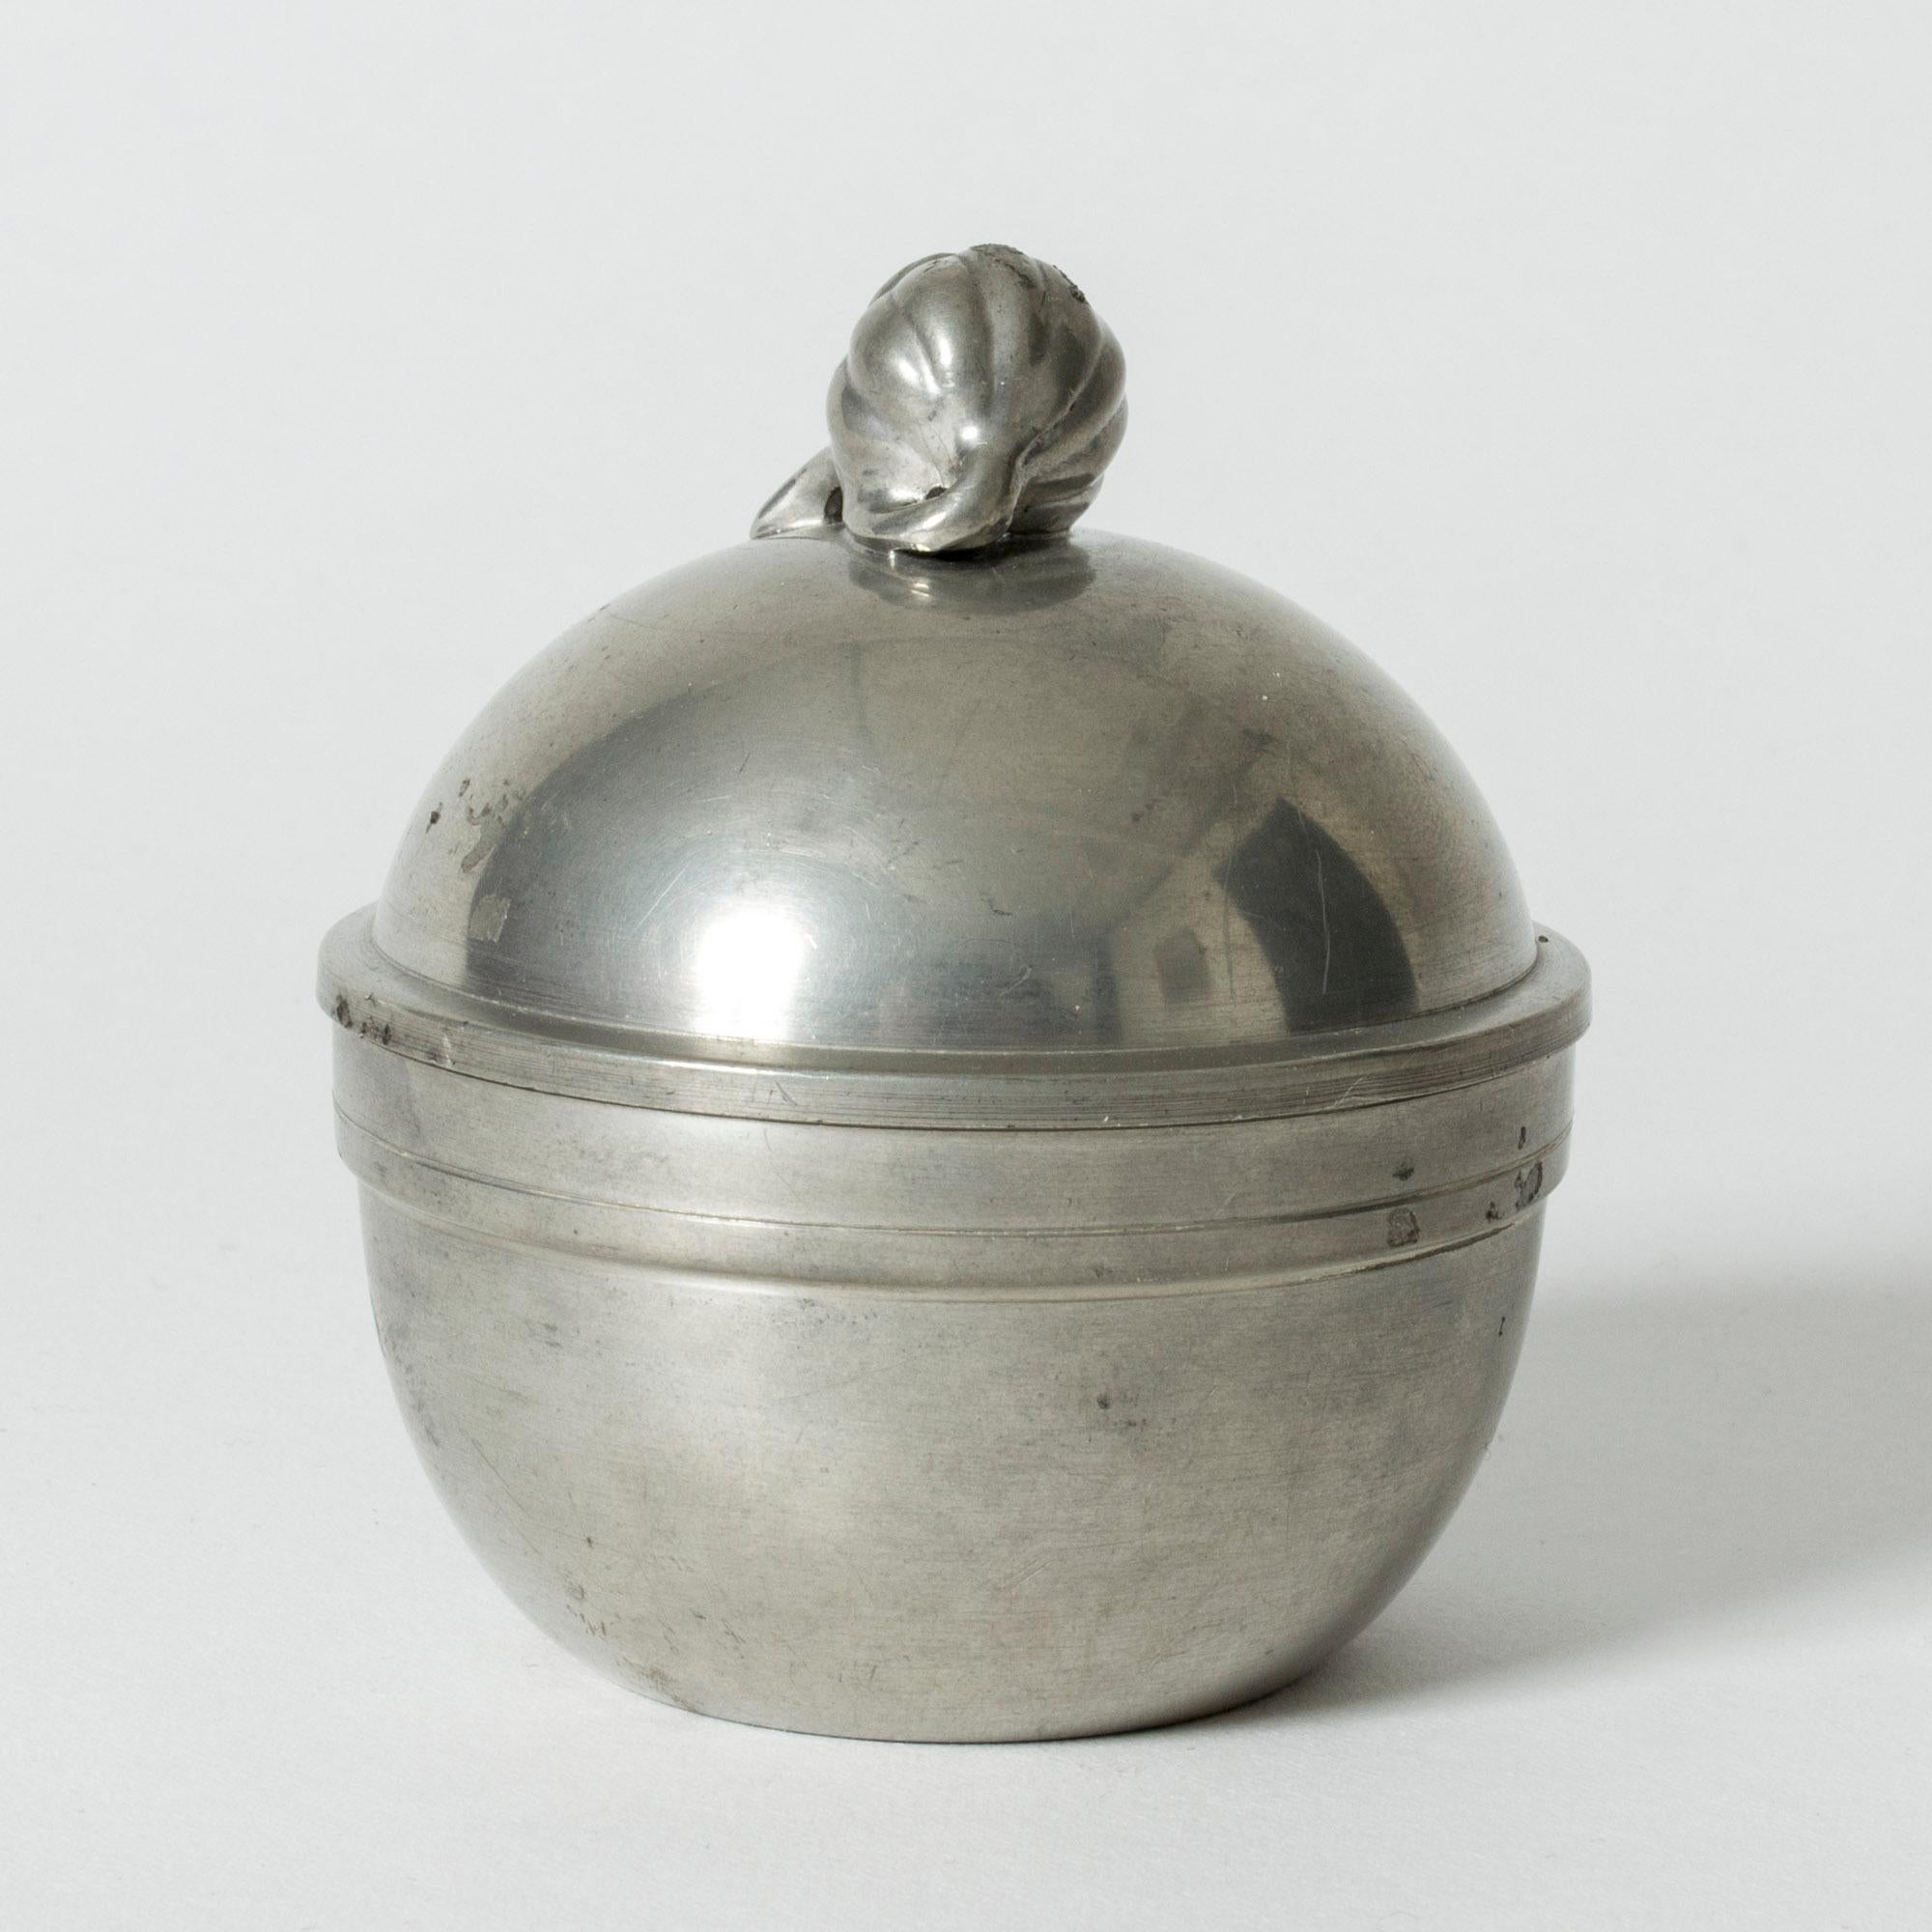 Lovely little pewter jar from GAB, in a round form. Adorned with a rose hip berry on the lid.